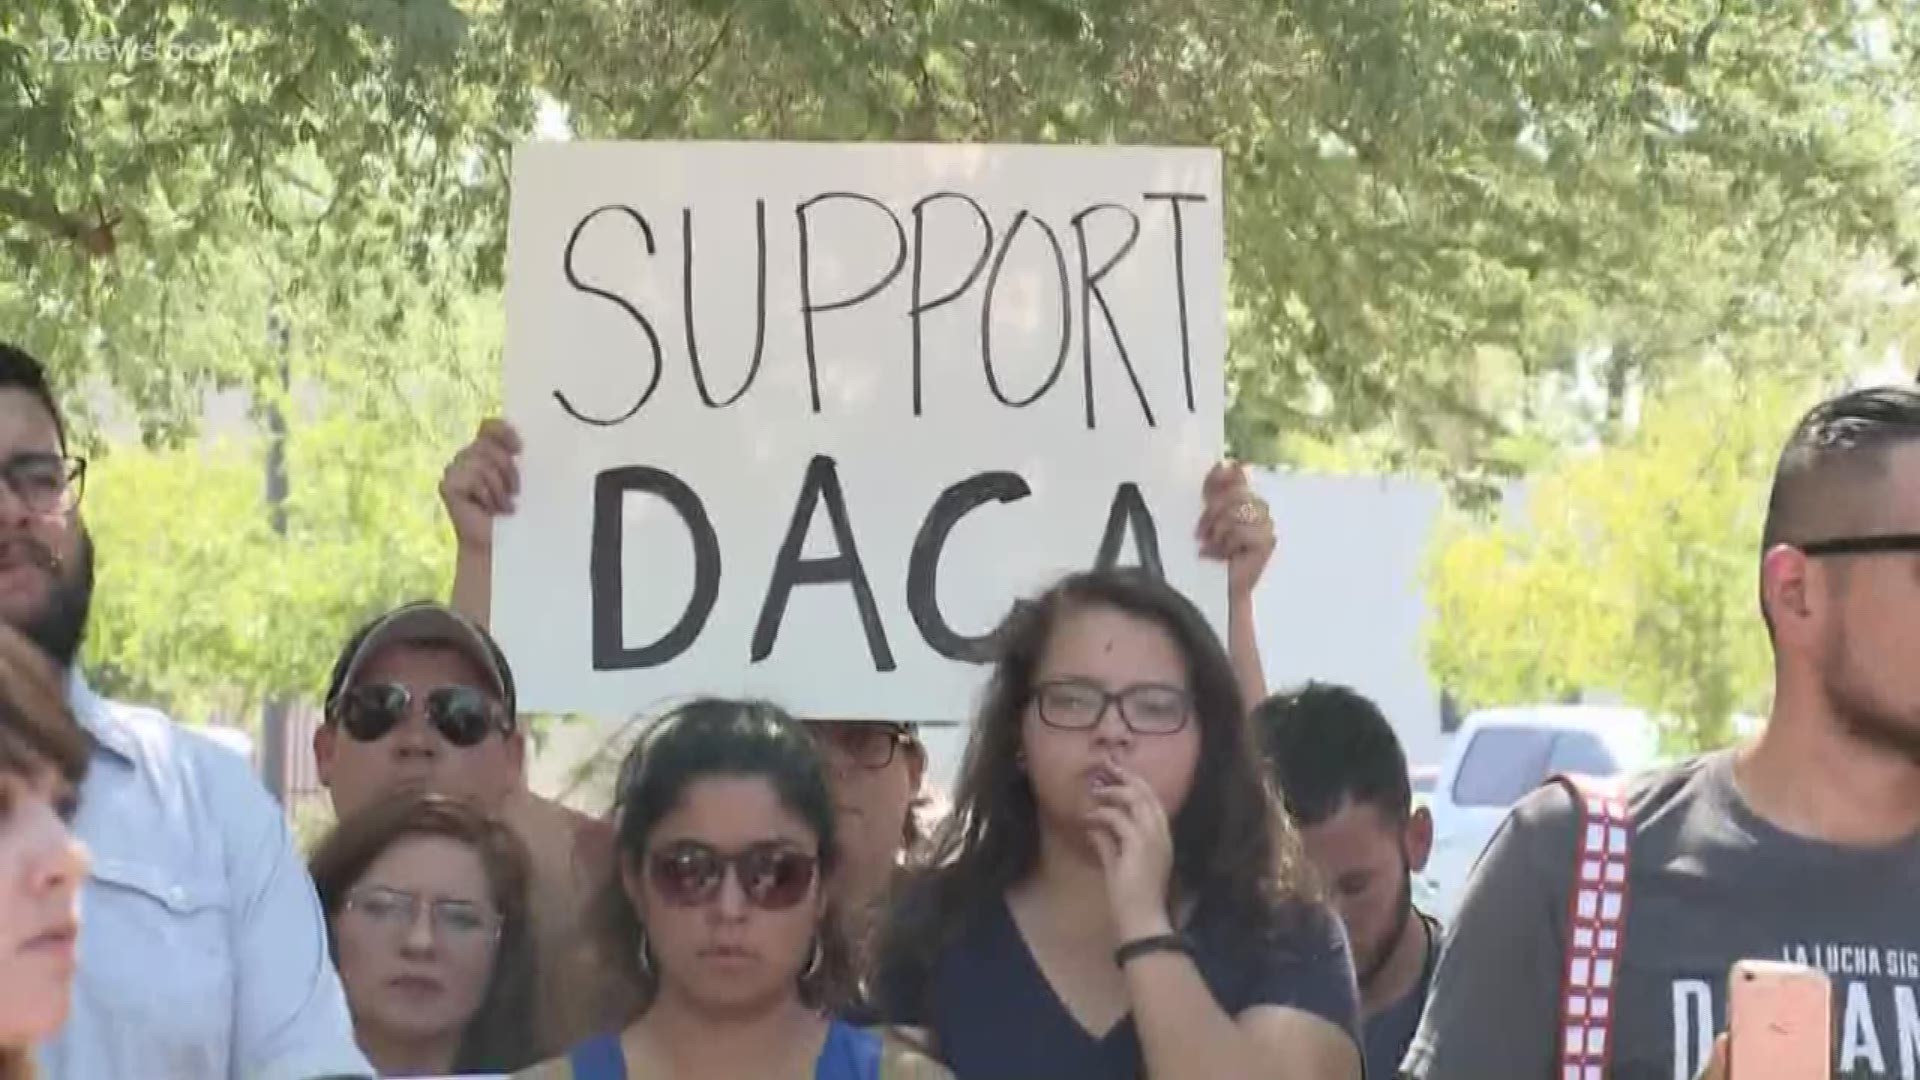 Thousands of Dreamers in Arizona will be in limbo for another year, waiting for the highest court in the land to decide their fate. The US Supreme Court says it will rule on whether president Trump can kill the DACA program. The ruling won't come for another year. Governor Doug Ducey and Senator Martha McSally weigh in with their thoughts on what should happen to the program.